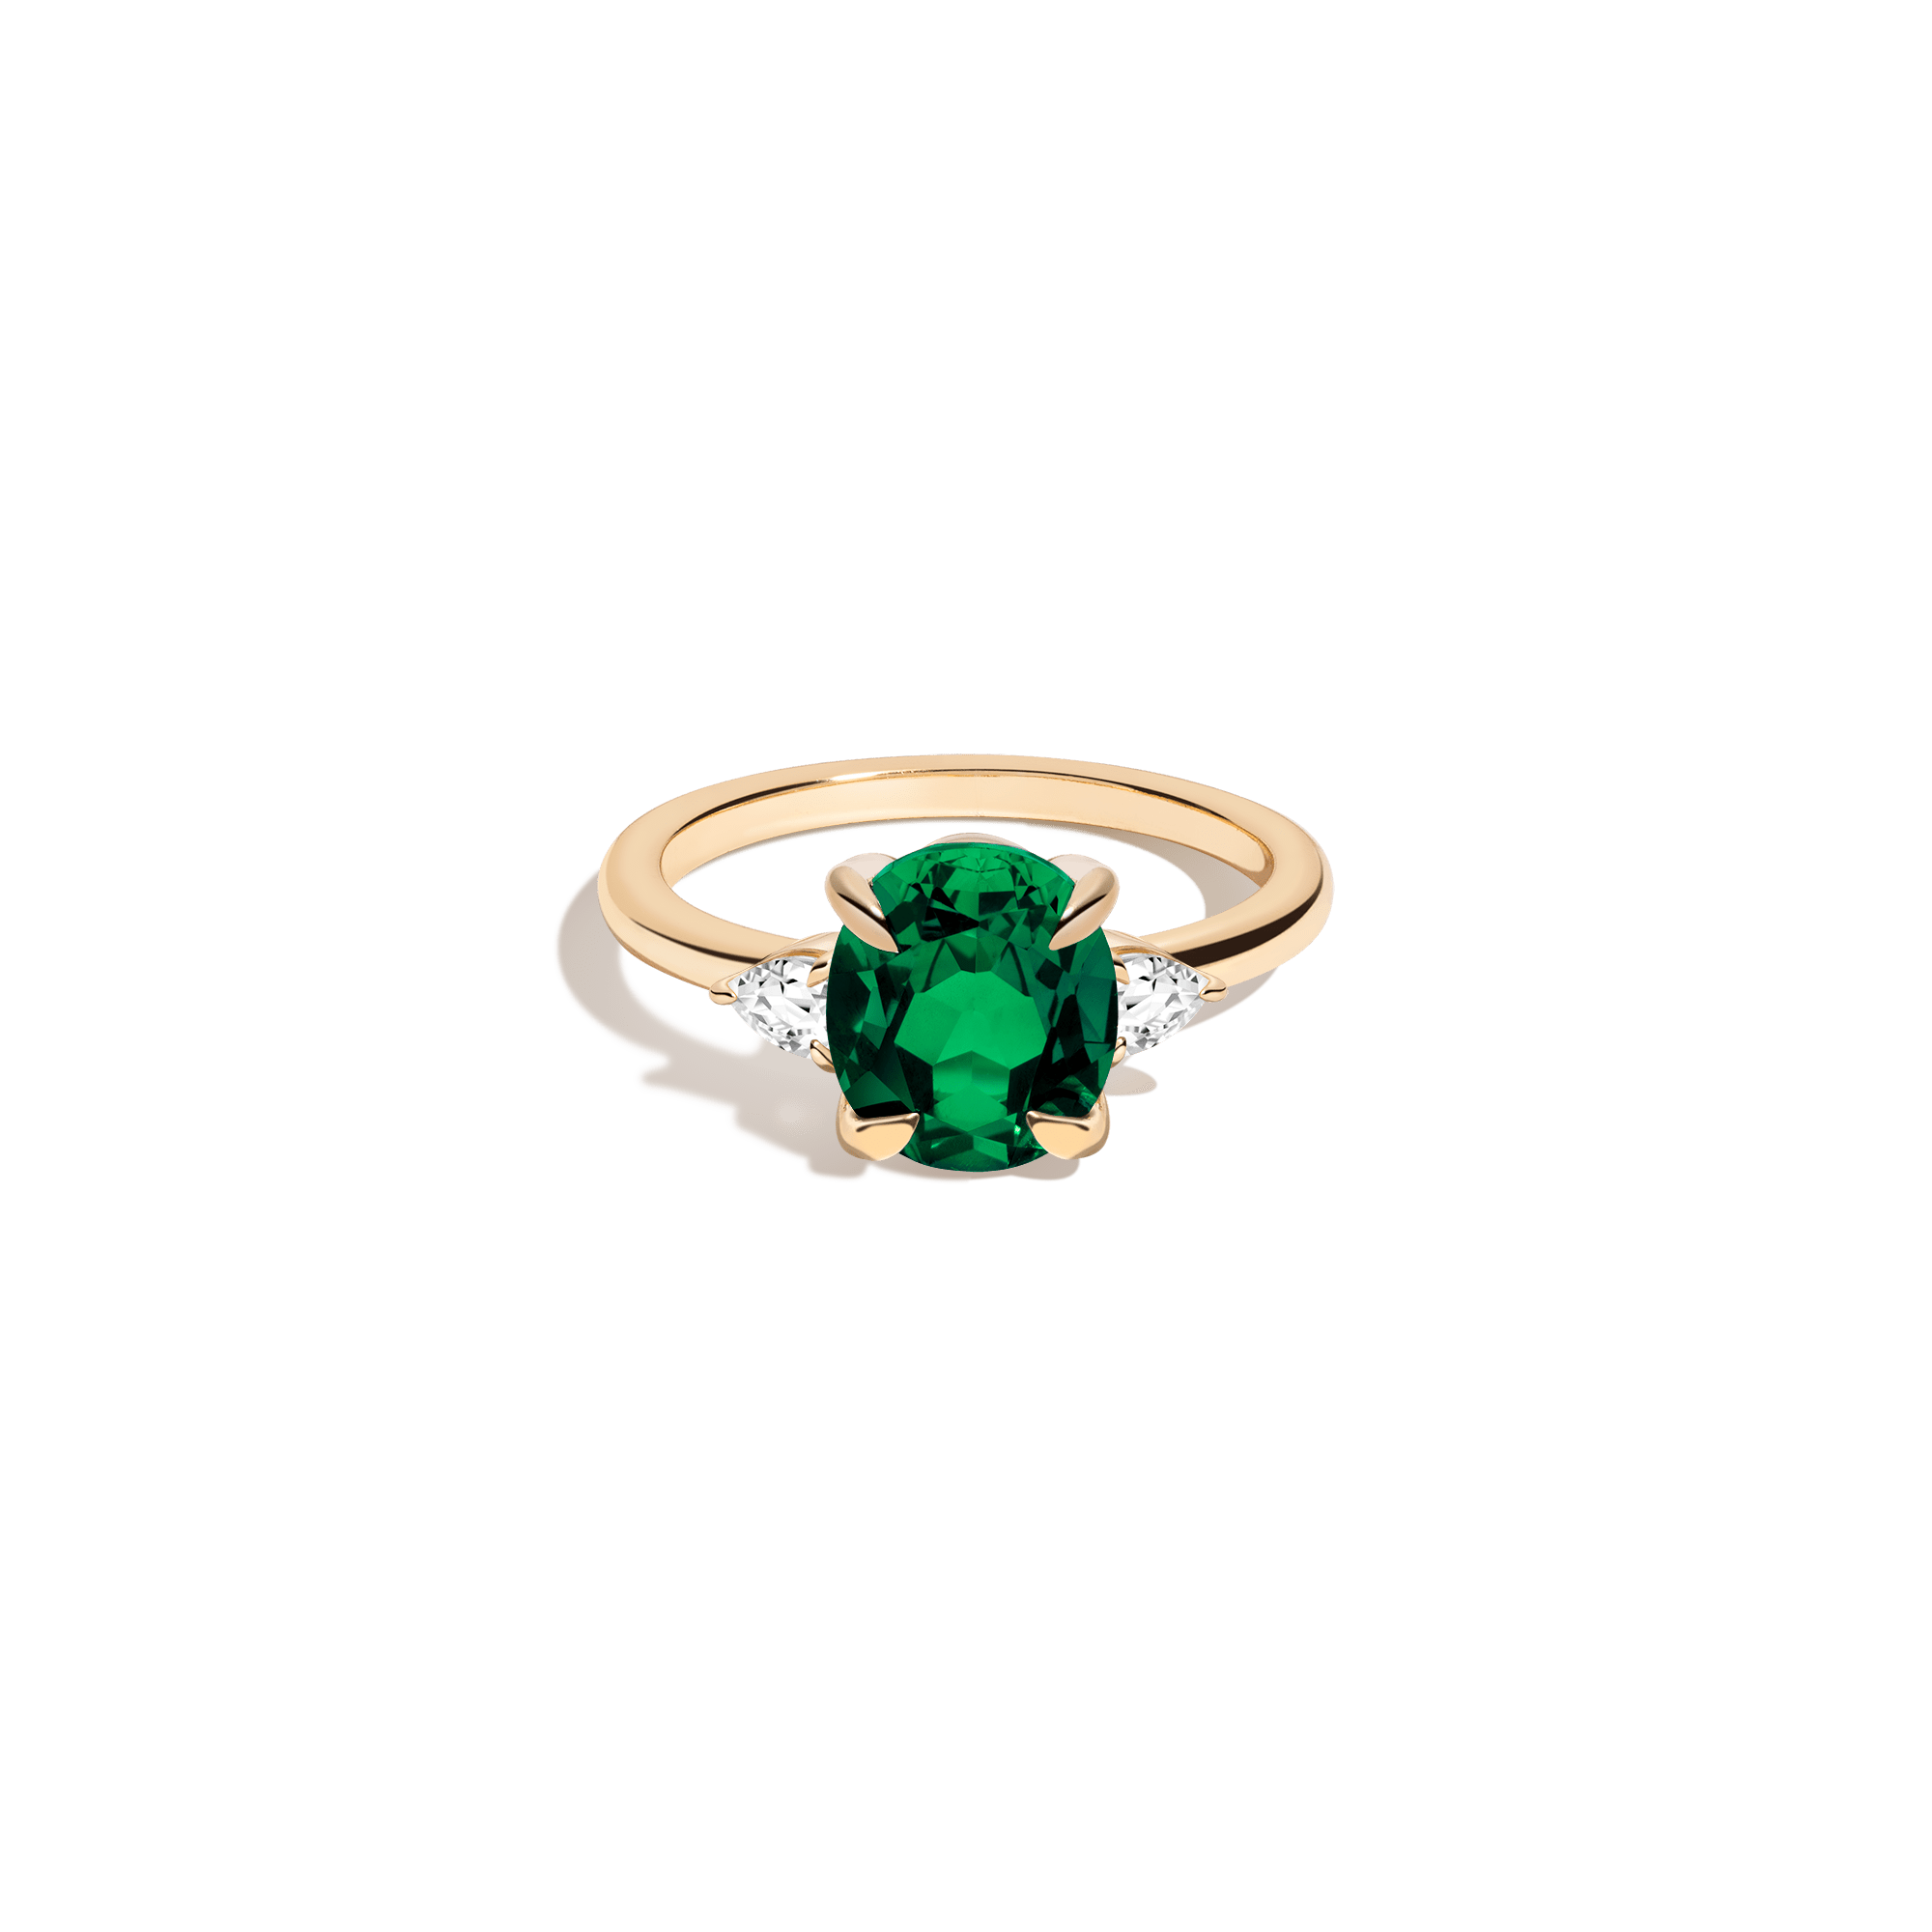 Shop Aurate New York Oval Gemstone Cocktail Ring - Green Emerald In White